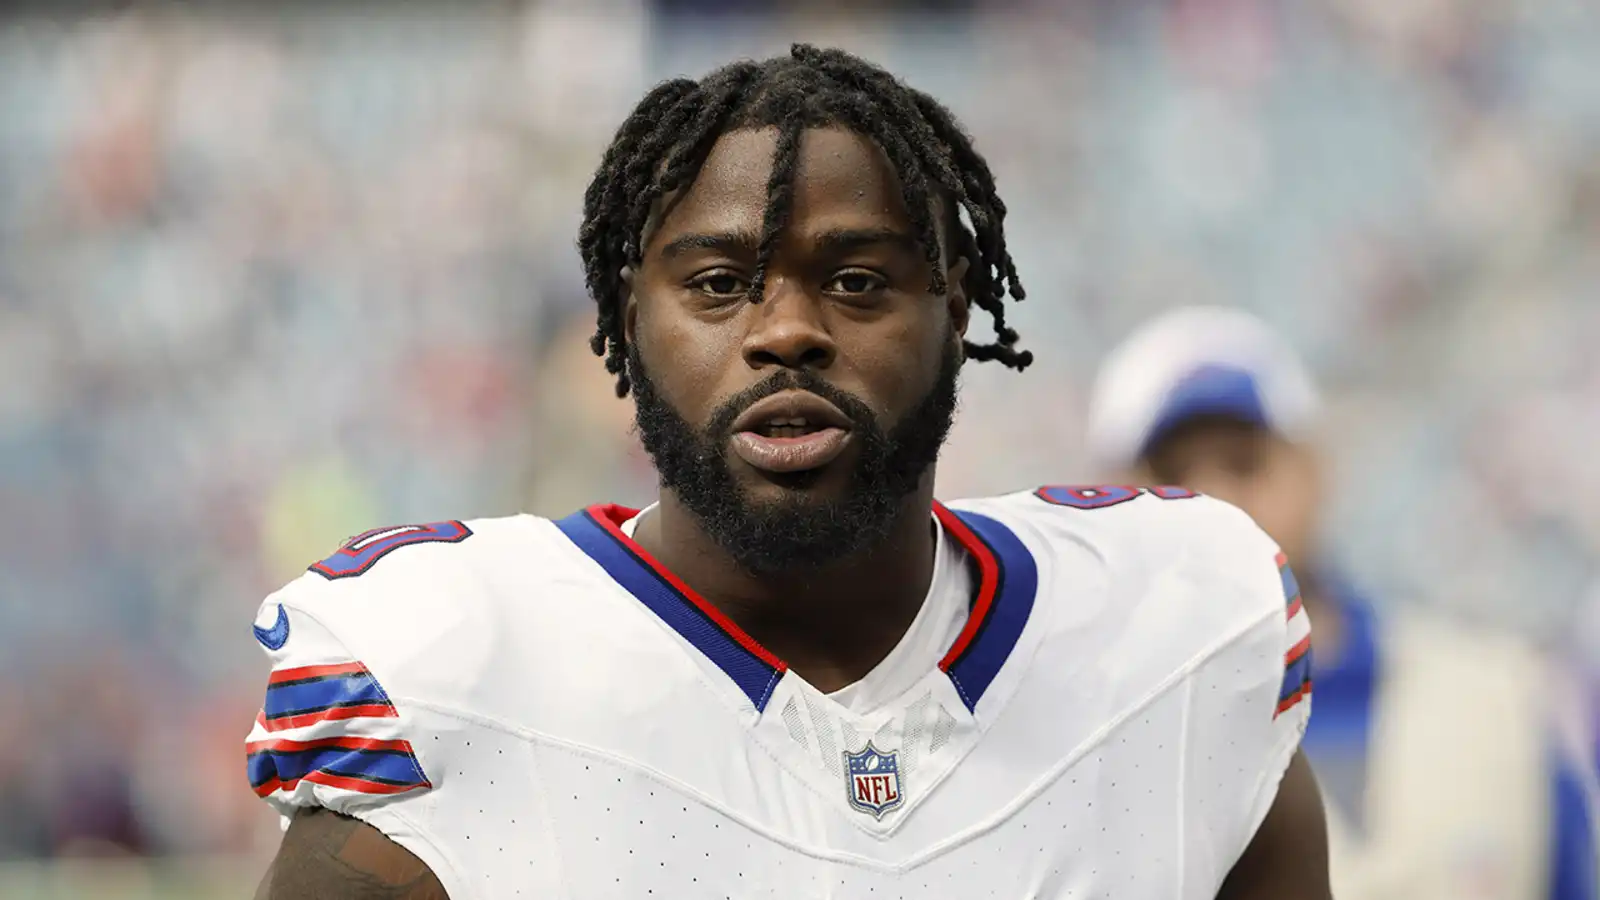 Bills DE apologizes for shoving Eagles fan, alleges threat to players and families